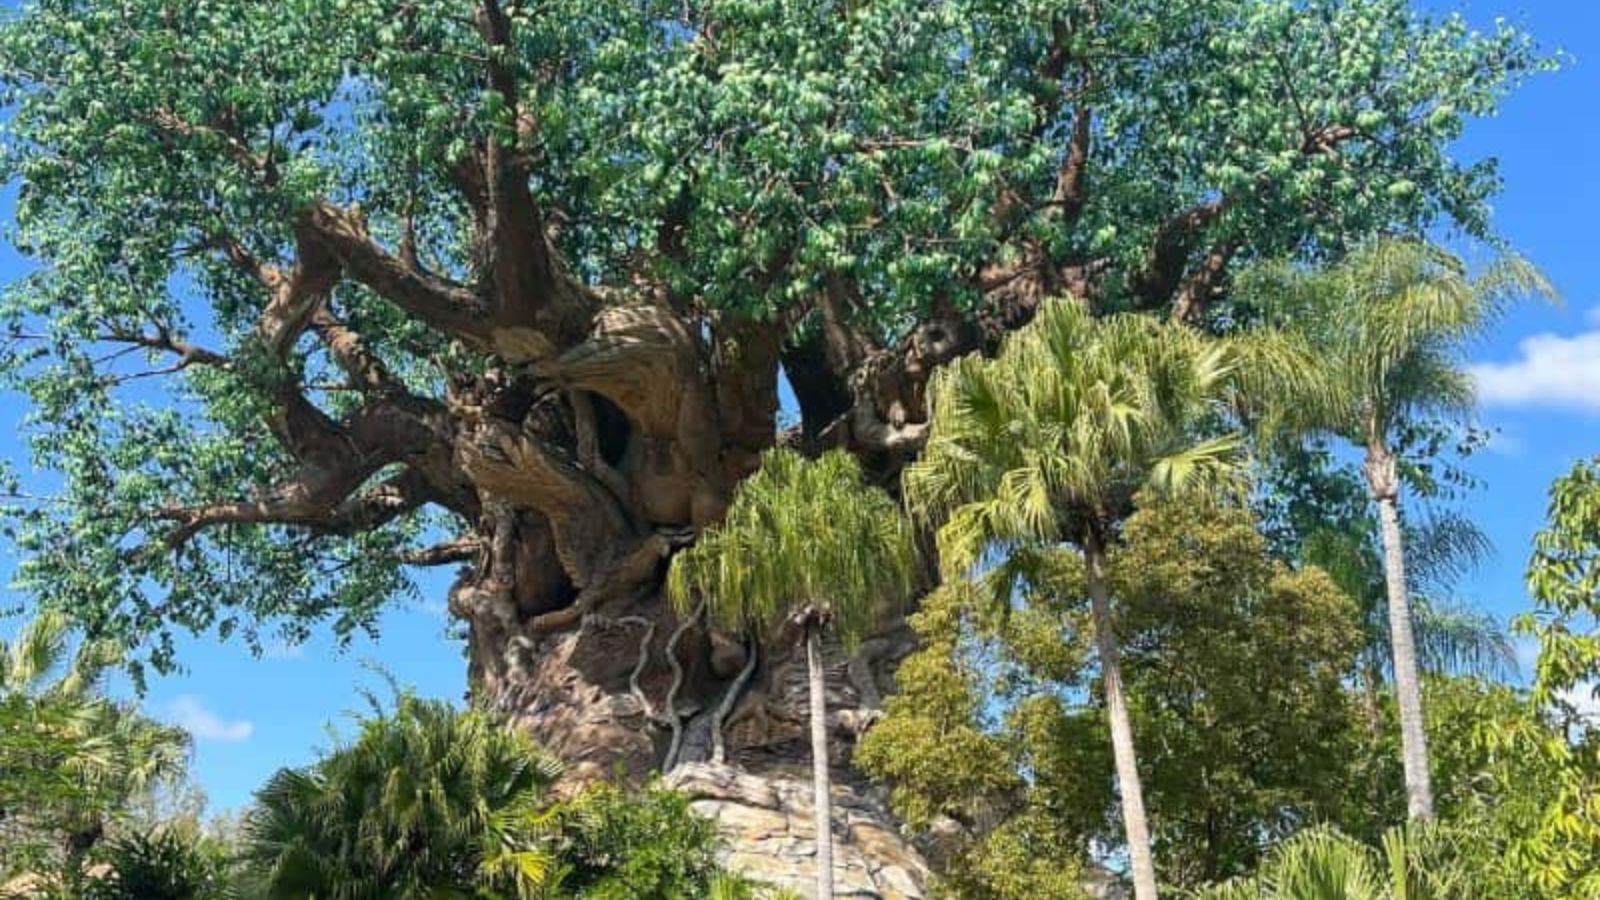 <p>Disney’s Animal Kingdom is one of the most iconic theme parks in the world. It was first opened in 1998 and is located in the Walt Disney World Resort near Orlando, Florida. Spanning over 500 acres, it is the largest theme park in Walt Disney World.</p><p>As its name implies, this park focuses on the animal kingdom and is home to many of the world’s most beloved animals. </p><p>Here you can experience exotic wildlife, and thrilling shows, and meet your favorite Disney characters.</p><ul> <li><strong>Africa</strong> – Of course, a theme park dedicated to animals must feature Africa. Take a journey on the Kilimanjaro safari and view wild animals in their own habitat. Zebras, giraffes, elephants, rhinos, and more will be seen in the park.</li> <li><strong>Asia</strong>– Asia is a fun land with great rides such as Expedition Everest, and the food is really good. here too!</li> <li><strong>DinoLand U.S.A </strong>– Ride the Dinosaur! ride. There was a playground for kids here, but it is being rethemed currently.</li> <li><strong>Discovery Island – </strong>The highlight of Discovery Island is definitely the enormous Tree of Life. Attend the bugs life show, it’s fun.</li> <li><strong>Pandora – The World of Avatar</strong> – This is my favorite land in Animal Kingdom. If you’ve seen the movie Avatar, you will love it here. Ride flight of passage for sure, it’s one of the most fun rides. Be sure and check out Pandora at night, it is so pretty!</li> </ul>